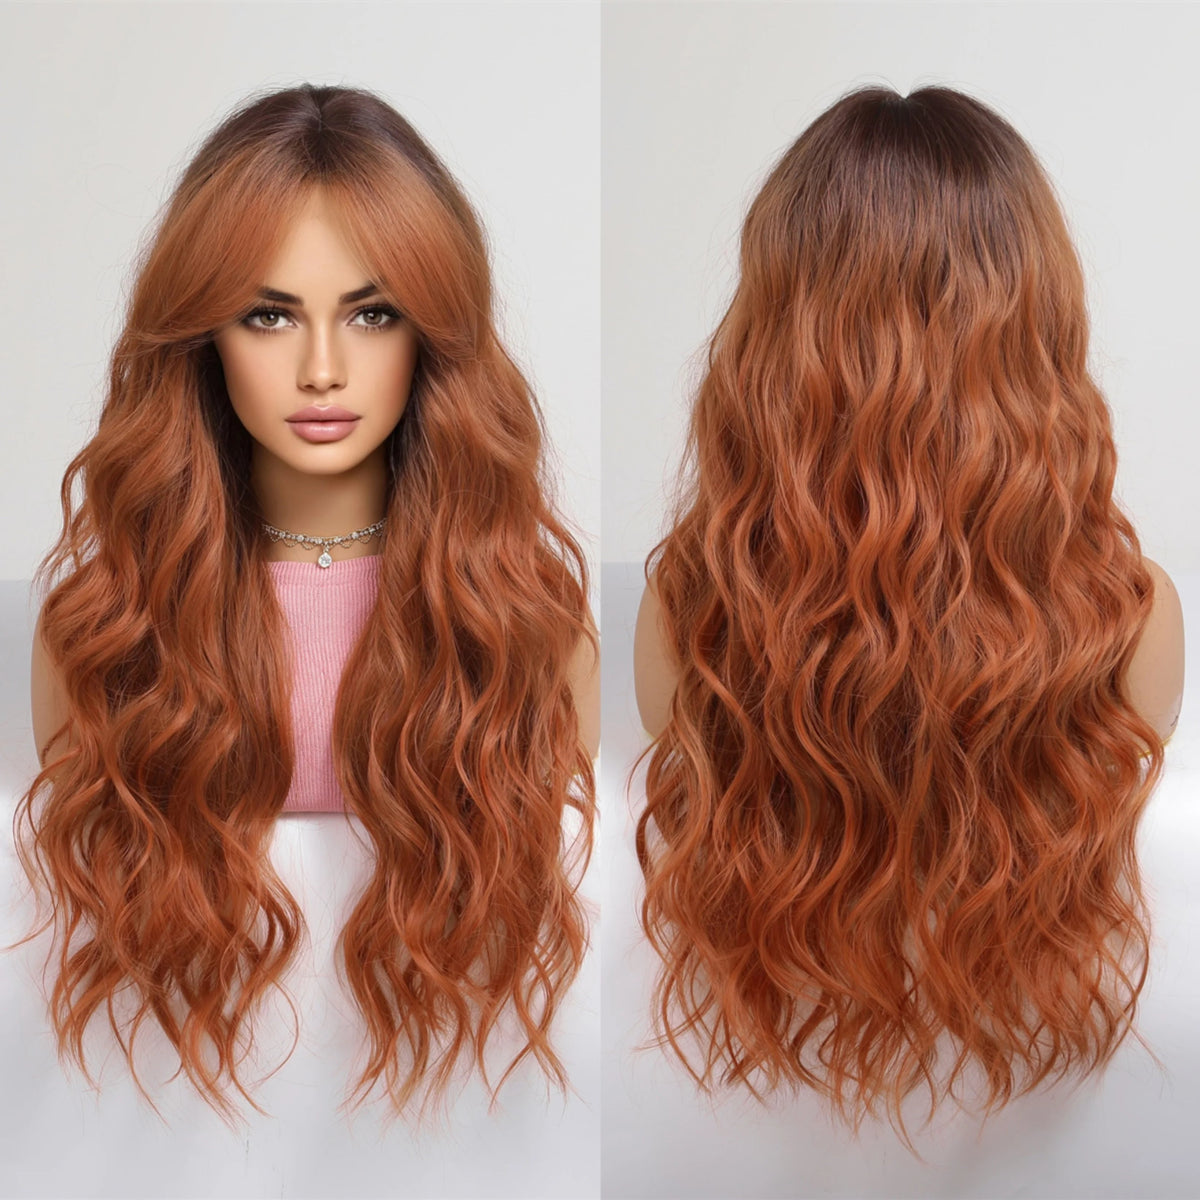 Long Wavy Brown Synthetic Wigs - HairNjoy